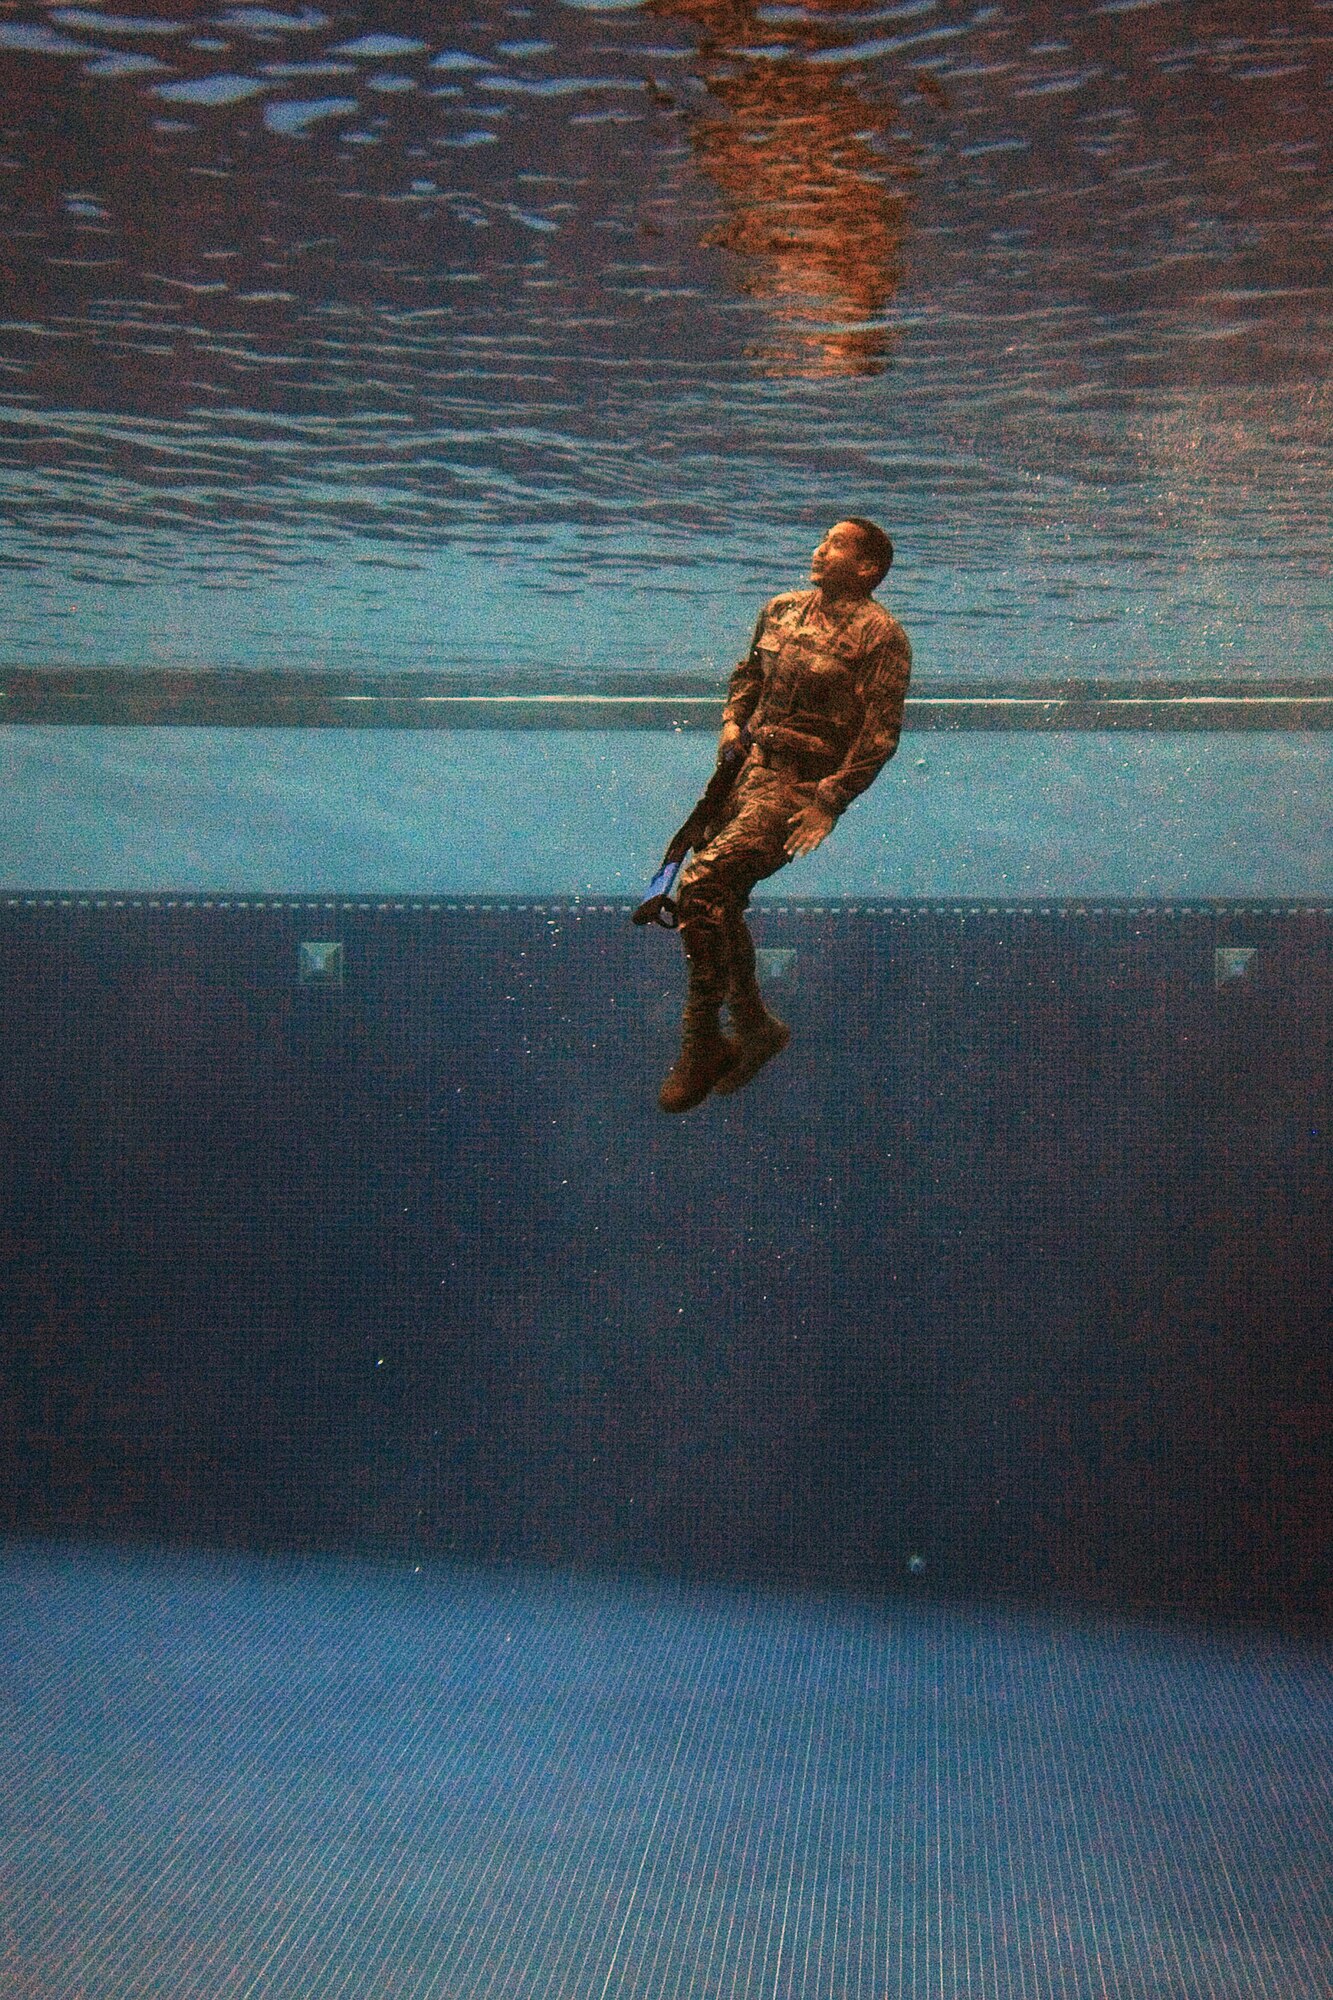 A security forces Airman plunges into the combat water survival test at the U.S. Air Force Academy, Colo., July 17, 2015. The event was part of a daylong course for Airmen across the Front Range area to determine if they are physically and mentally ready to attend the U.S. Army Pre-Ranger Training Assessment Course, a prerequisite to attending the U.S. Army Ranger School at Fort Benning, Ga. (U.S. Air Force photo/Jason Gutierrez)